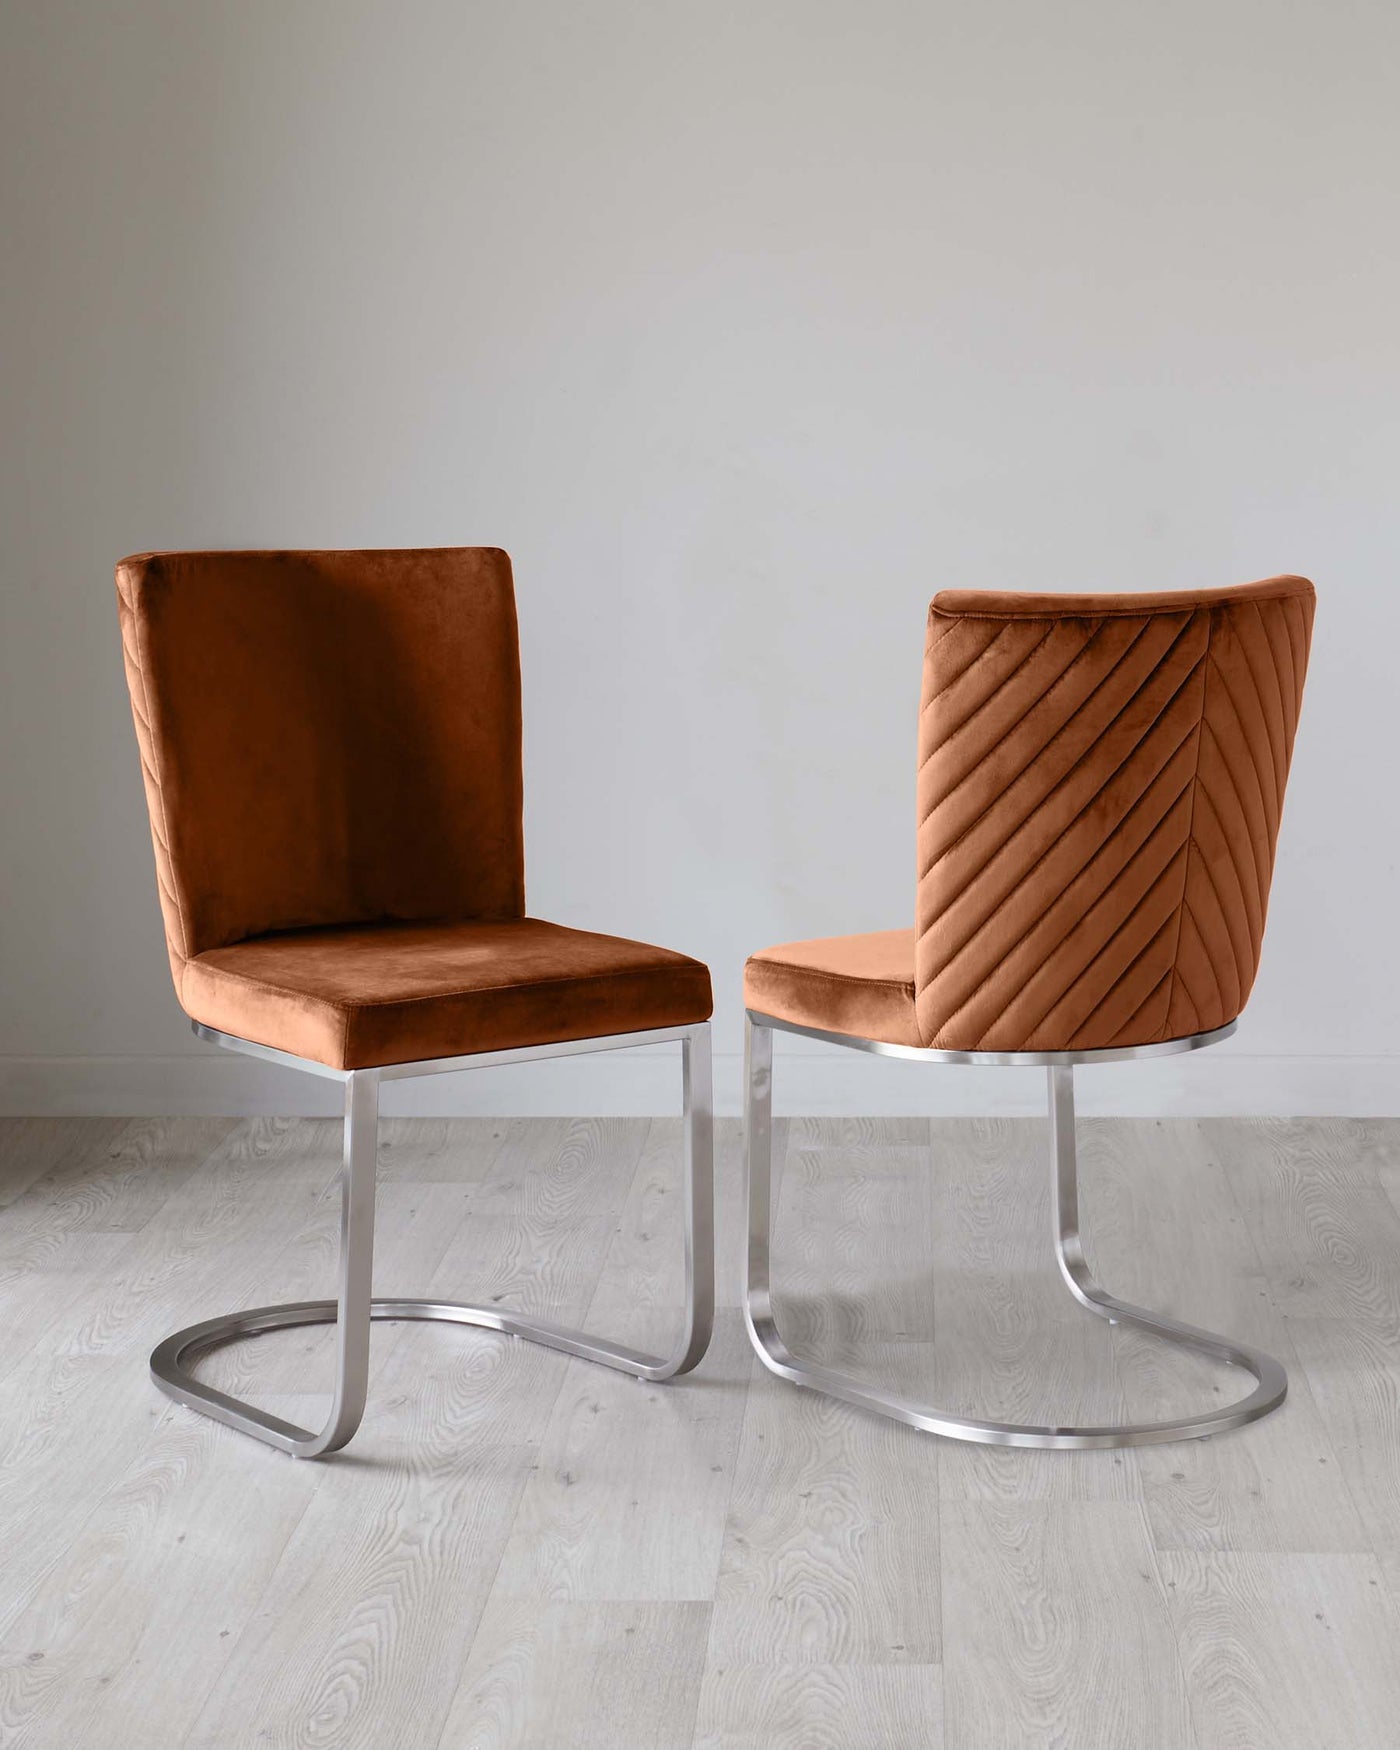 Two modern chairs with a sleek design, featuring burnished caramel velvet upholstery. The left chair has a clean, square back, while the right chair boasts a unique, diagonal pleat pattern on the backrest. Both have shiny, chrome cantilever bases, providing a contemporary touch on a light wooden floor against a neutral wall backdrop.